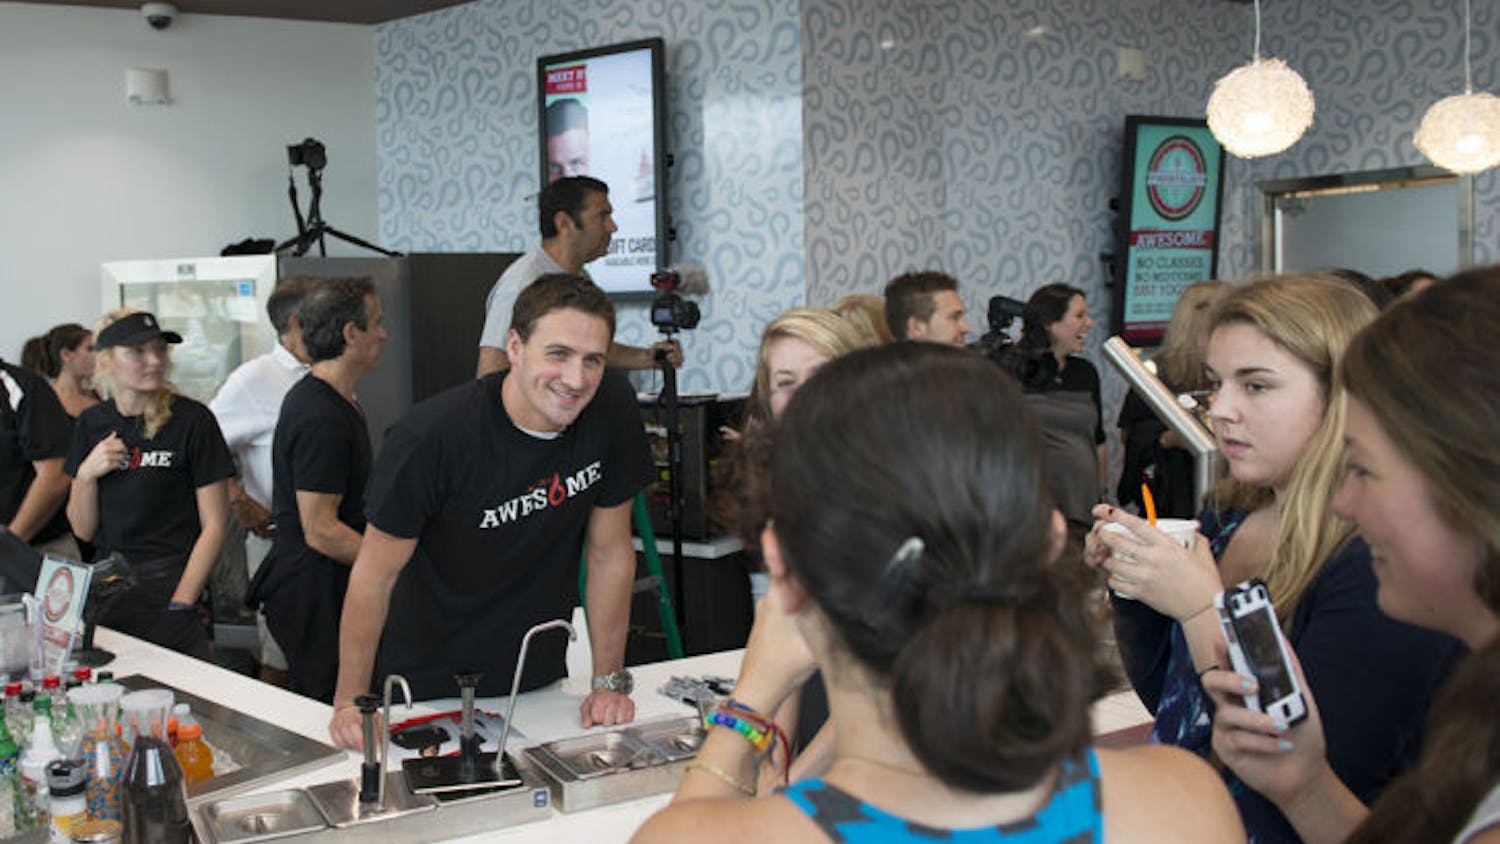 Ryan Lochte helps serve frozen yogurt to visitors at Yogurtology, 3730 Southwest Archer Road, on Saturday. The Olympic medalist partnered with the franchise to help raise money for charities he supports such as the Mac Crutchfield Foundation and Parent Project Muscular Dystrophy.